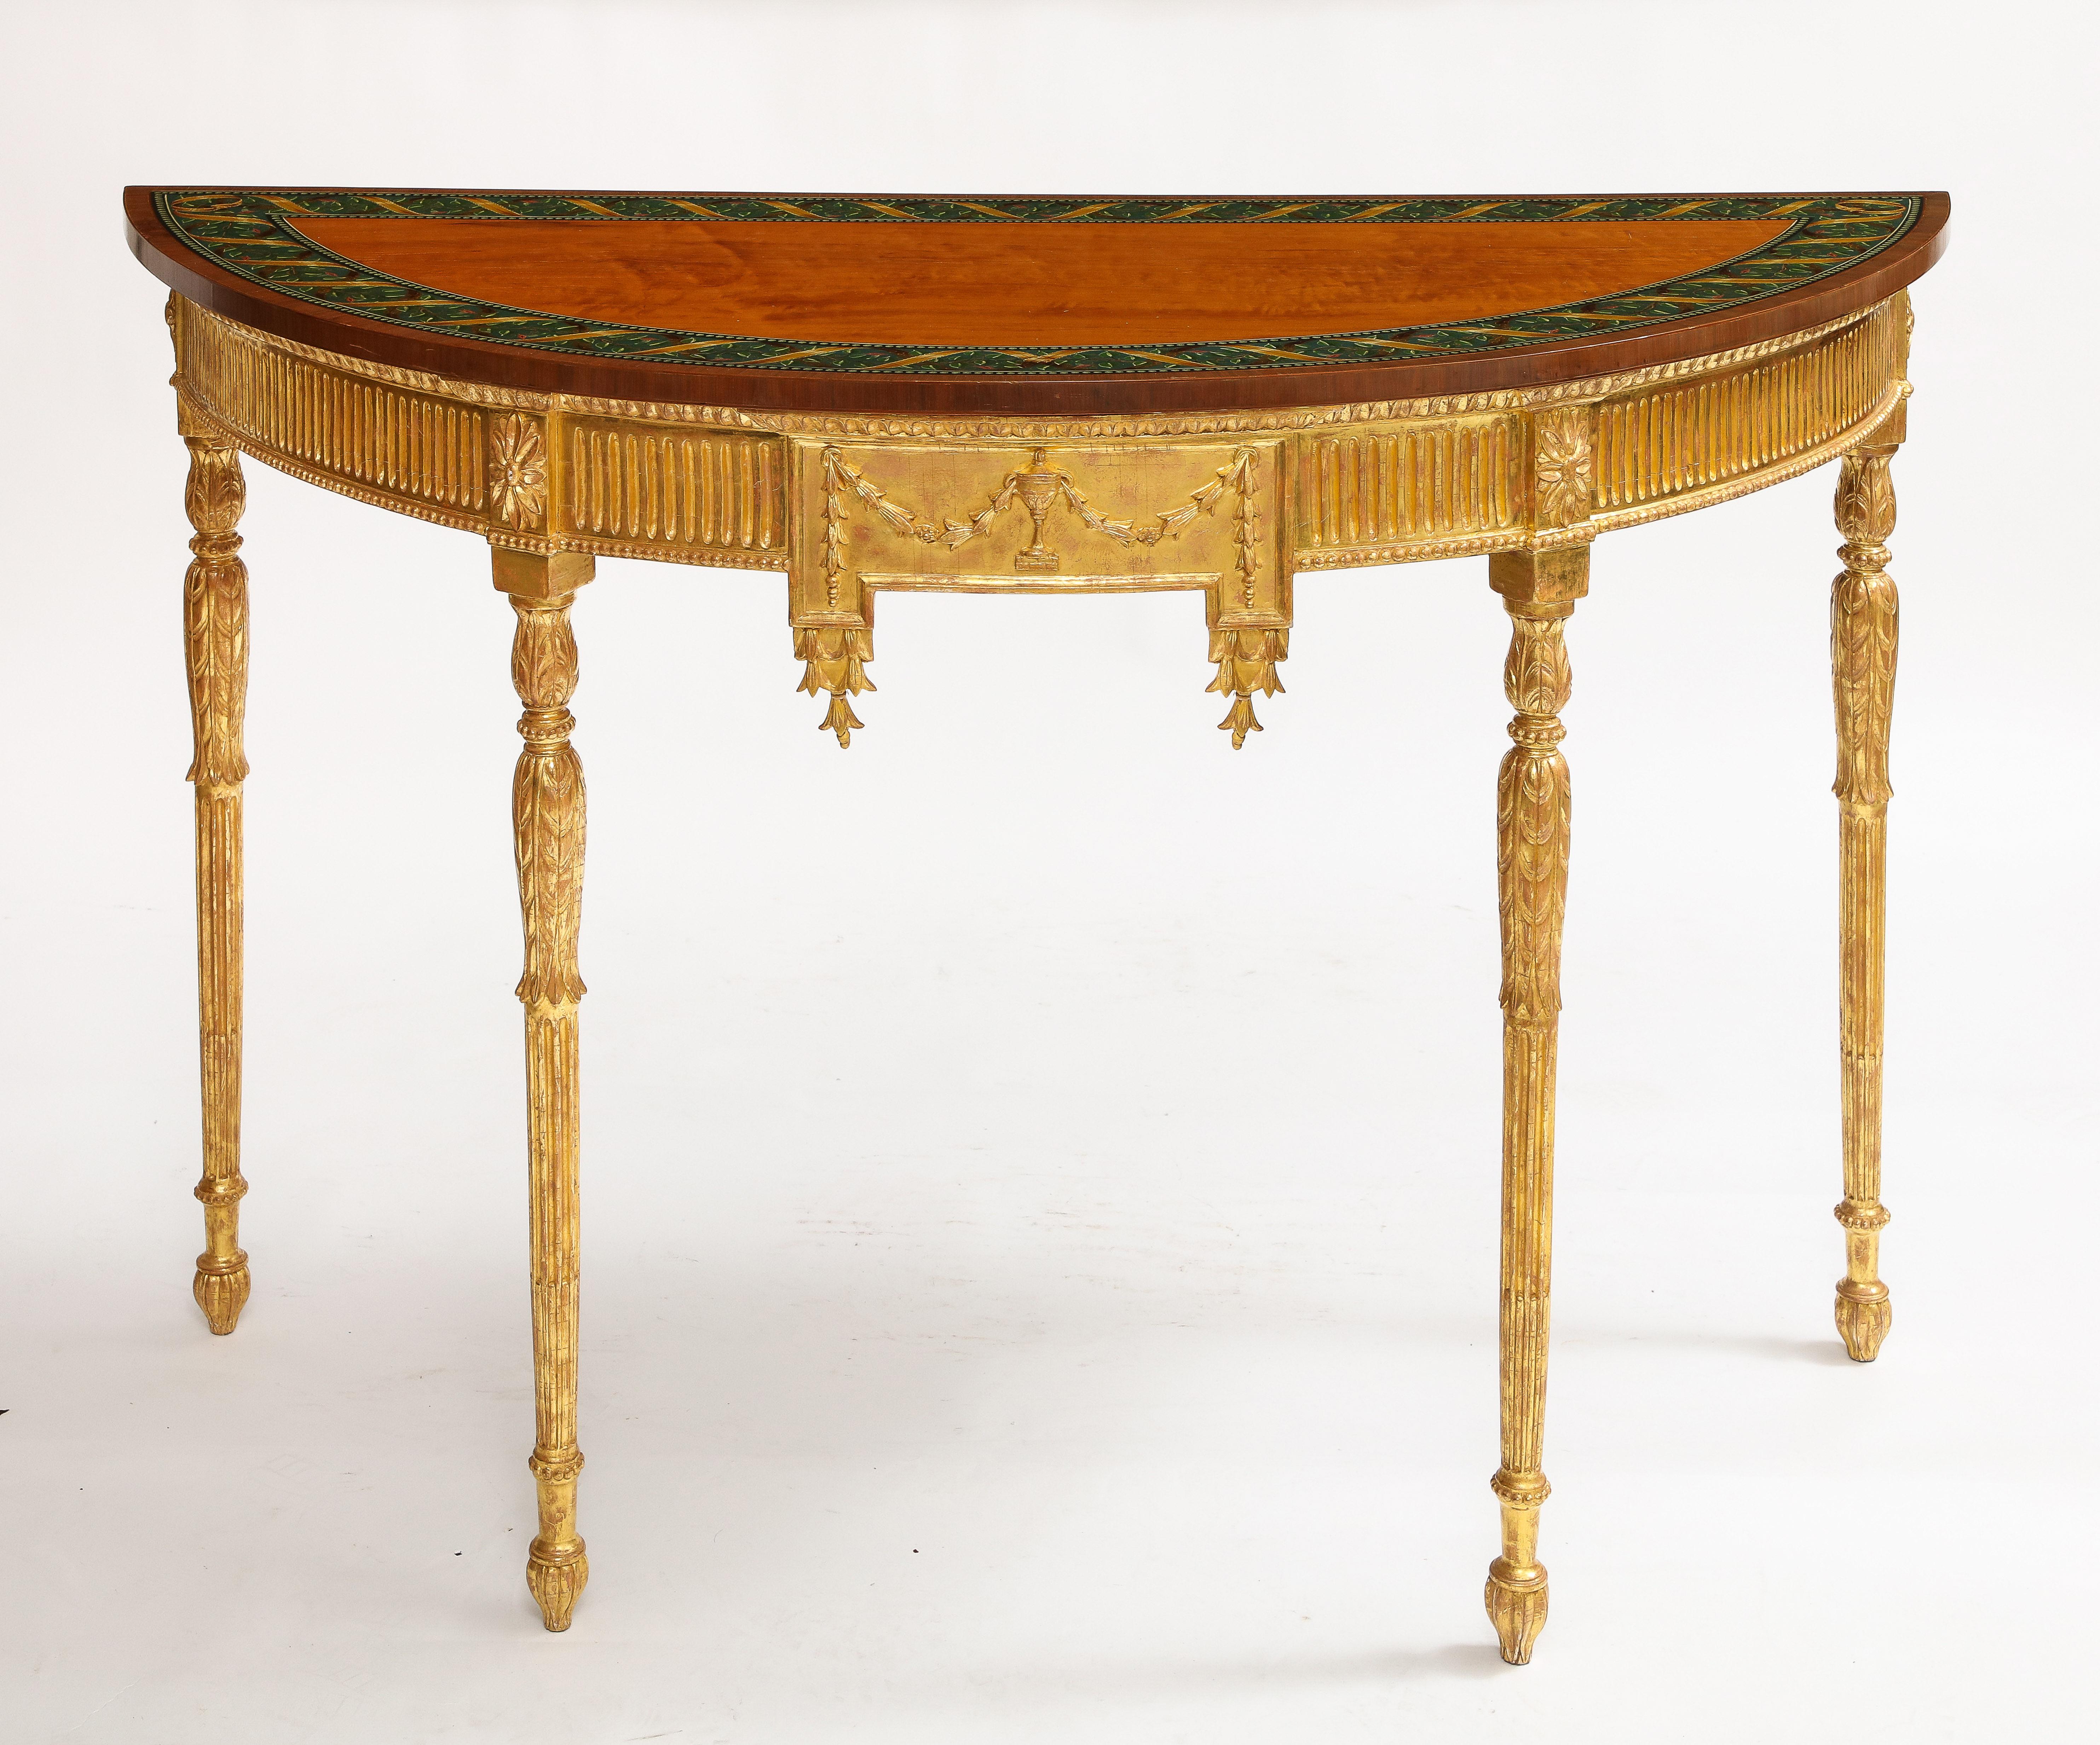 English A Pair of 18th C. George III Gilt-Wood Demi-lune Consoles tables w/ Painted Tops